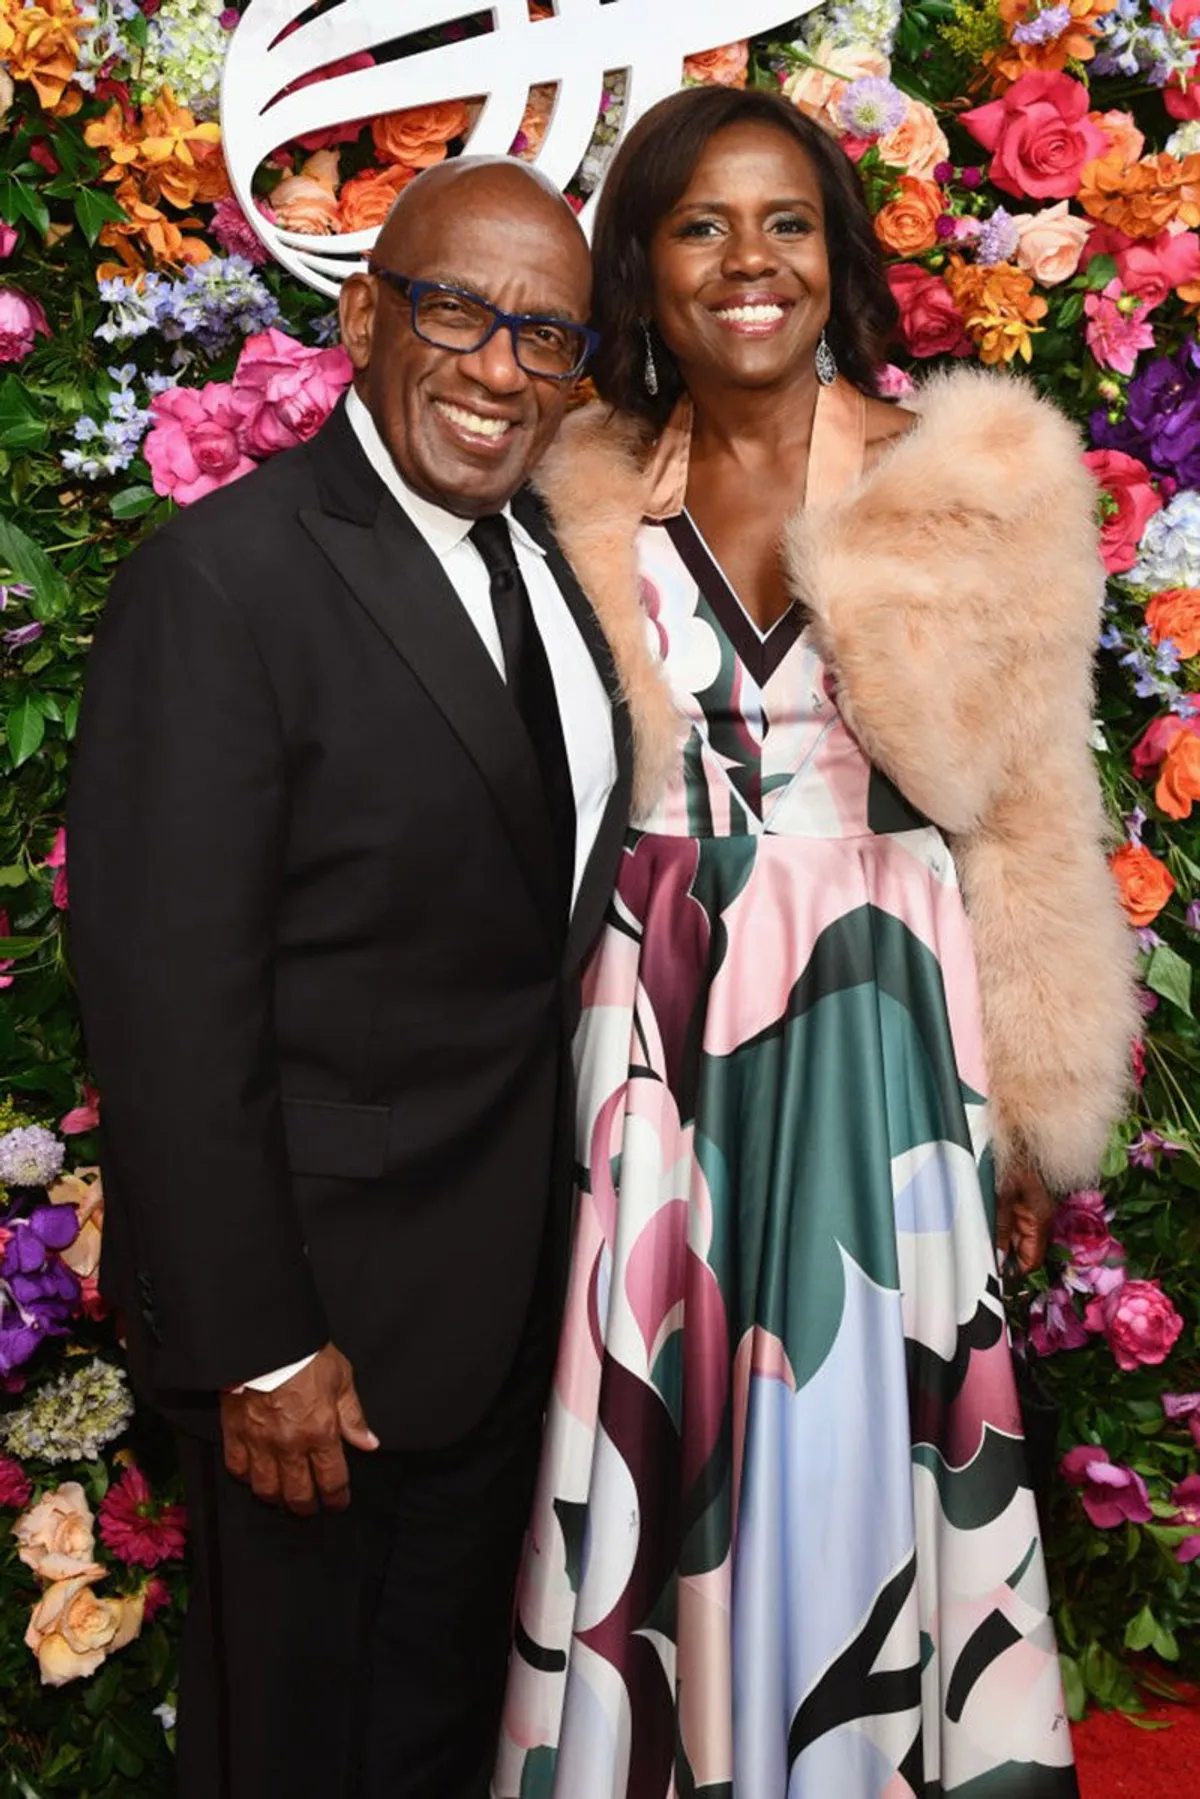 Al Roker and Deborah Roberts attend the American Theatre Wing Centennial Gala at Cipriani 42nd Street on September 24, 2018 in New York City. | Photo: Getty Images.